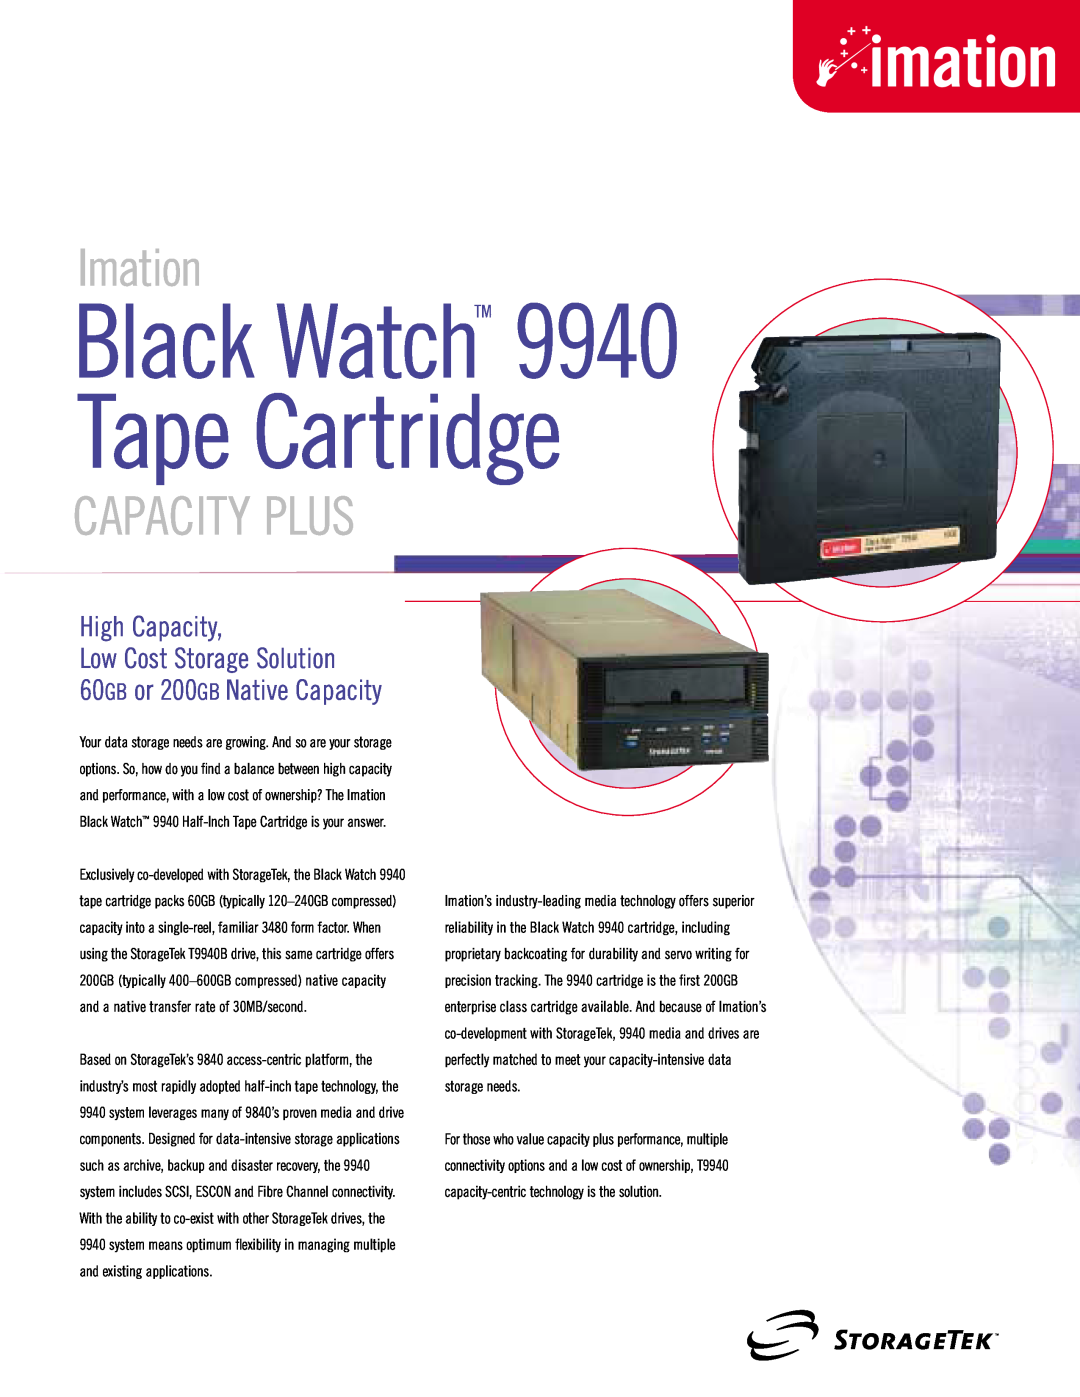 Imation manual Black WatchTM 9940 Tape Cartridge, Capacity Plus, Imation, High Capacity Low Cost Storage Solution 